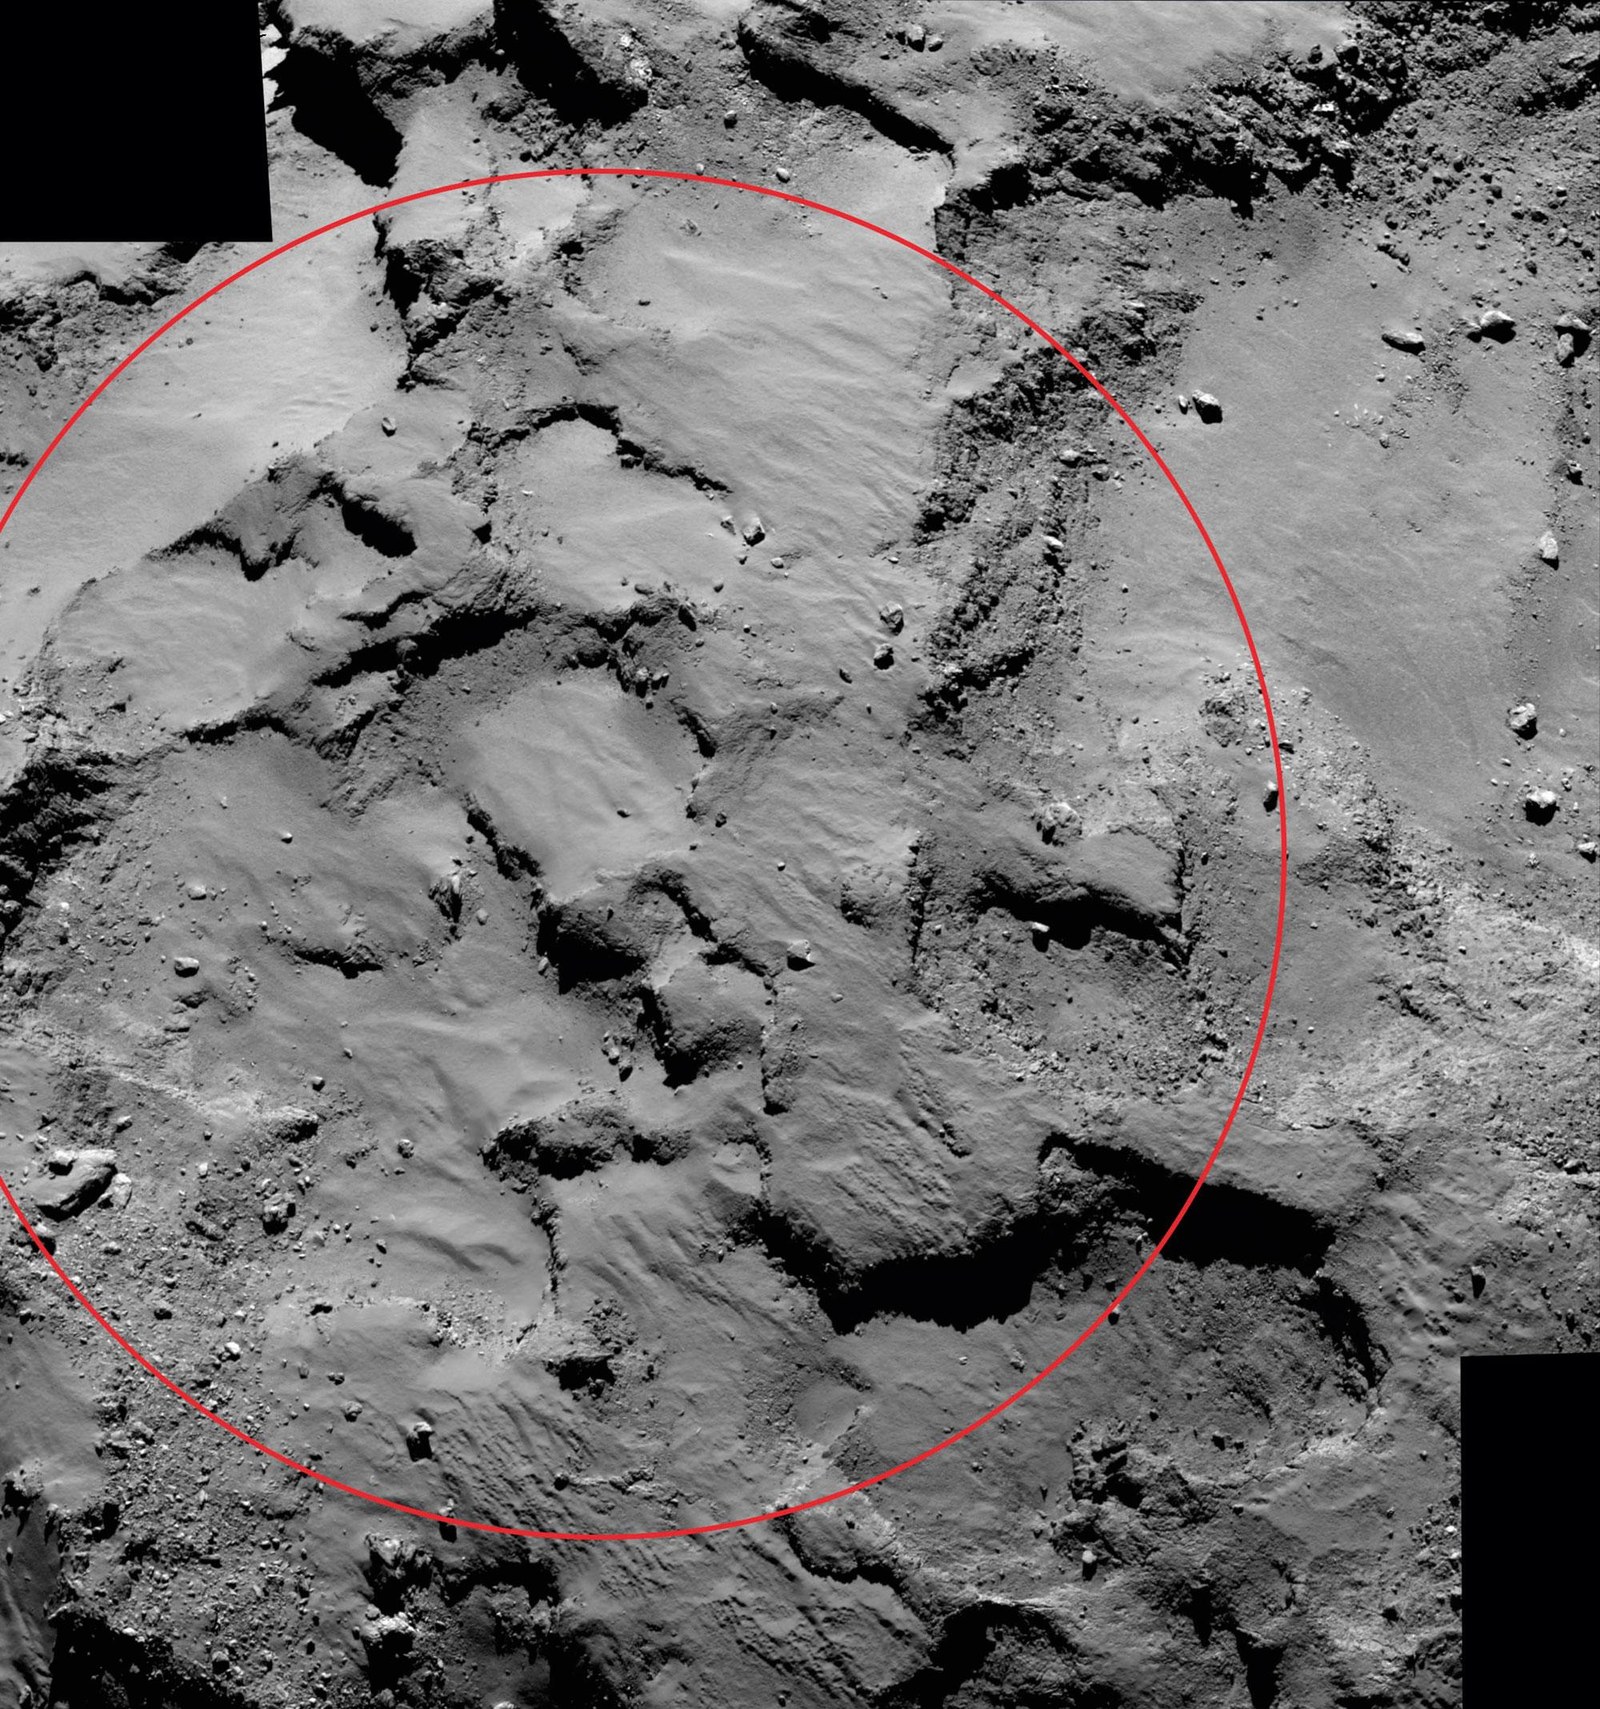 There was no way to actively steer Philae